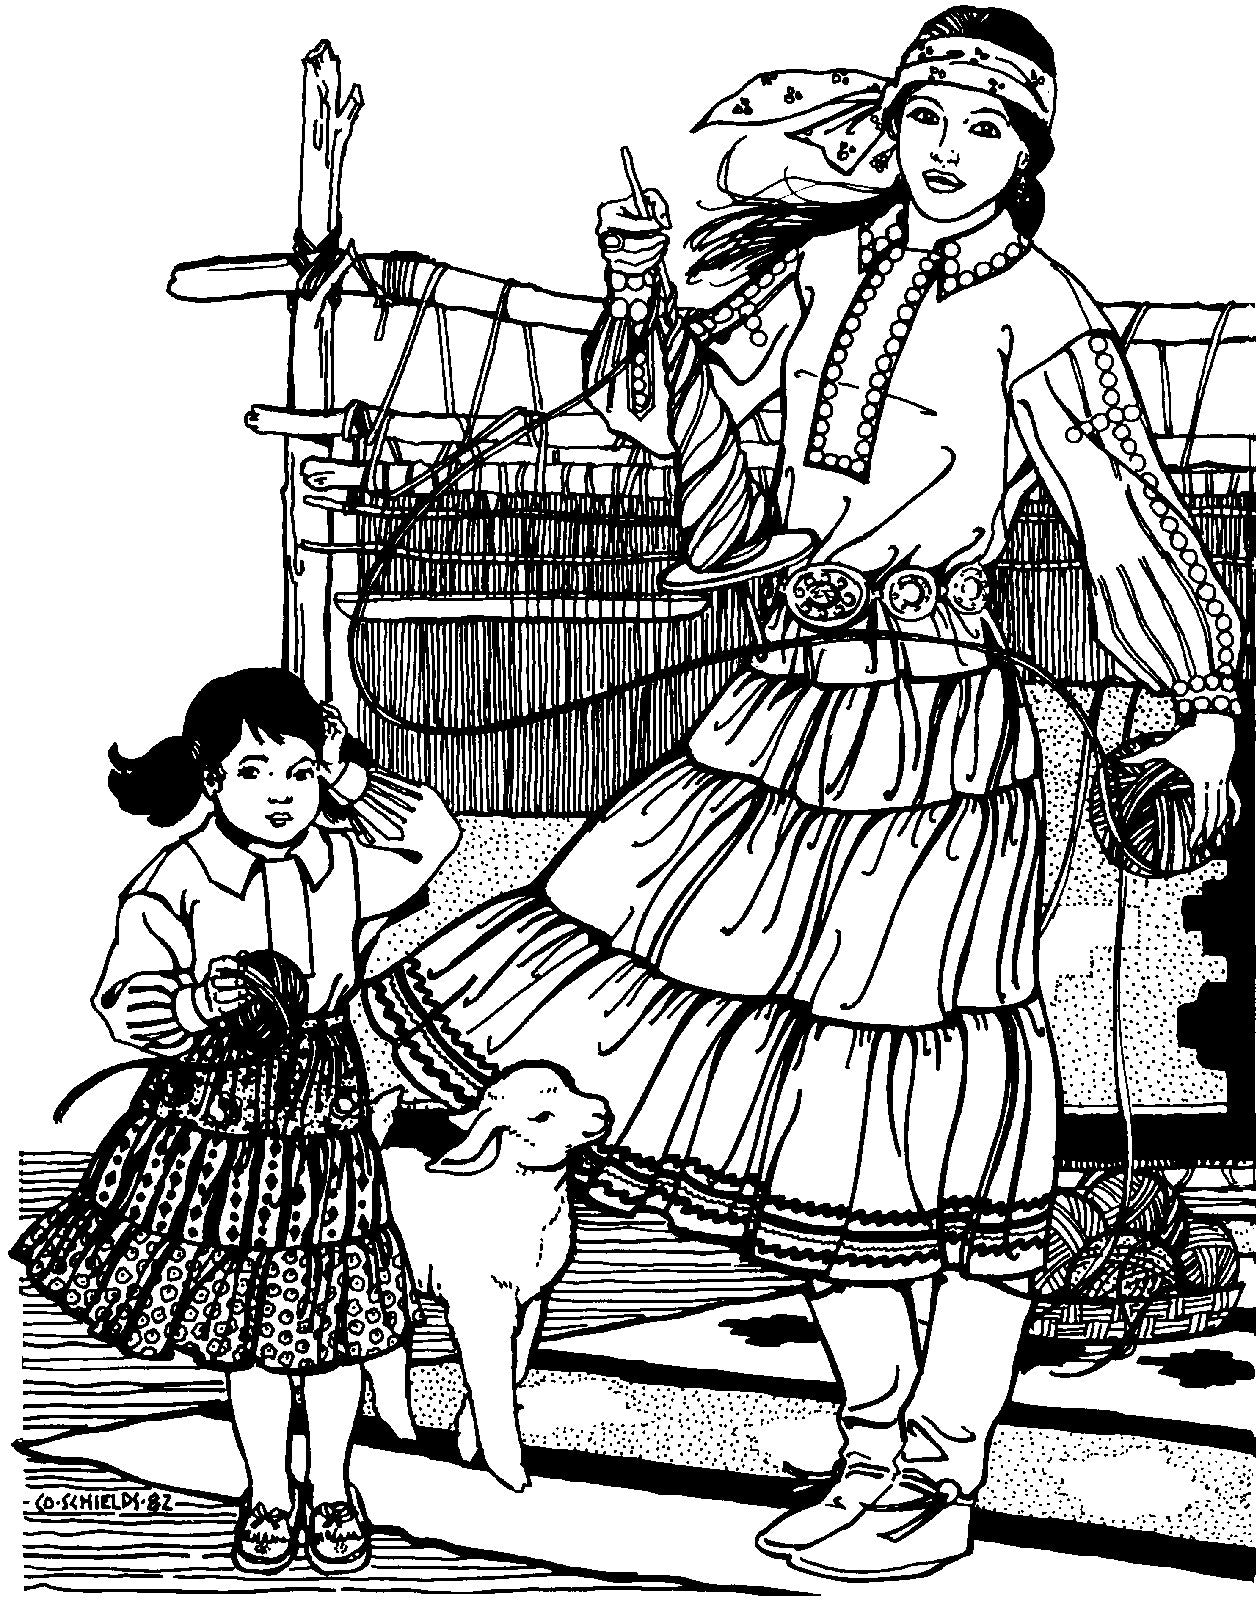 Woman and Child wearing 120 Navajo Blouse and Skirt.  Child is standing in front of woman holding a small drum.